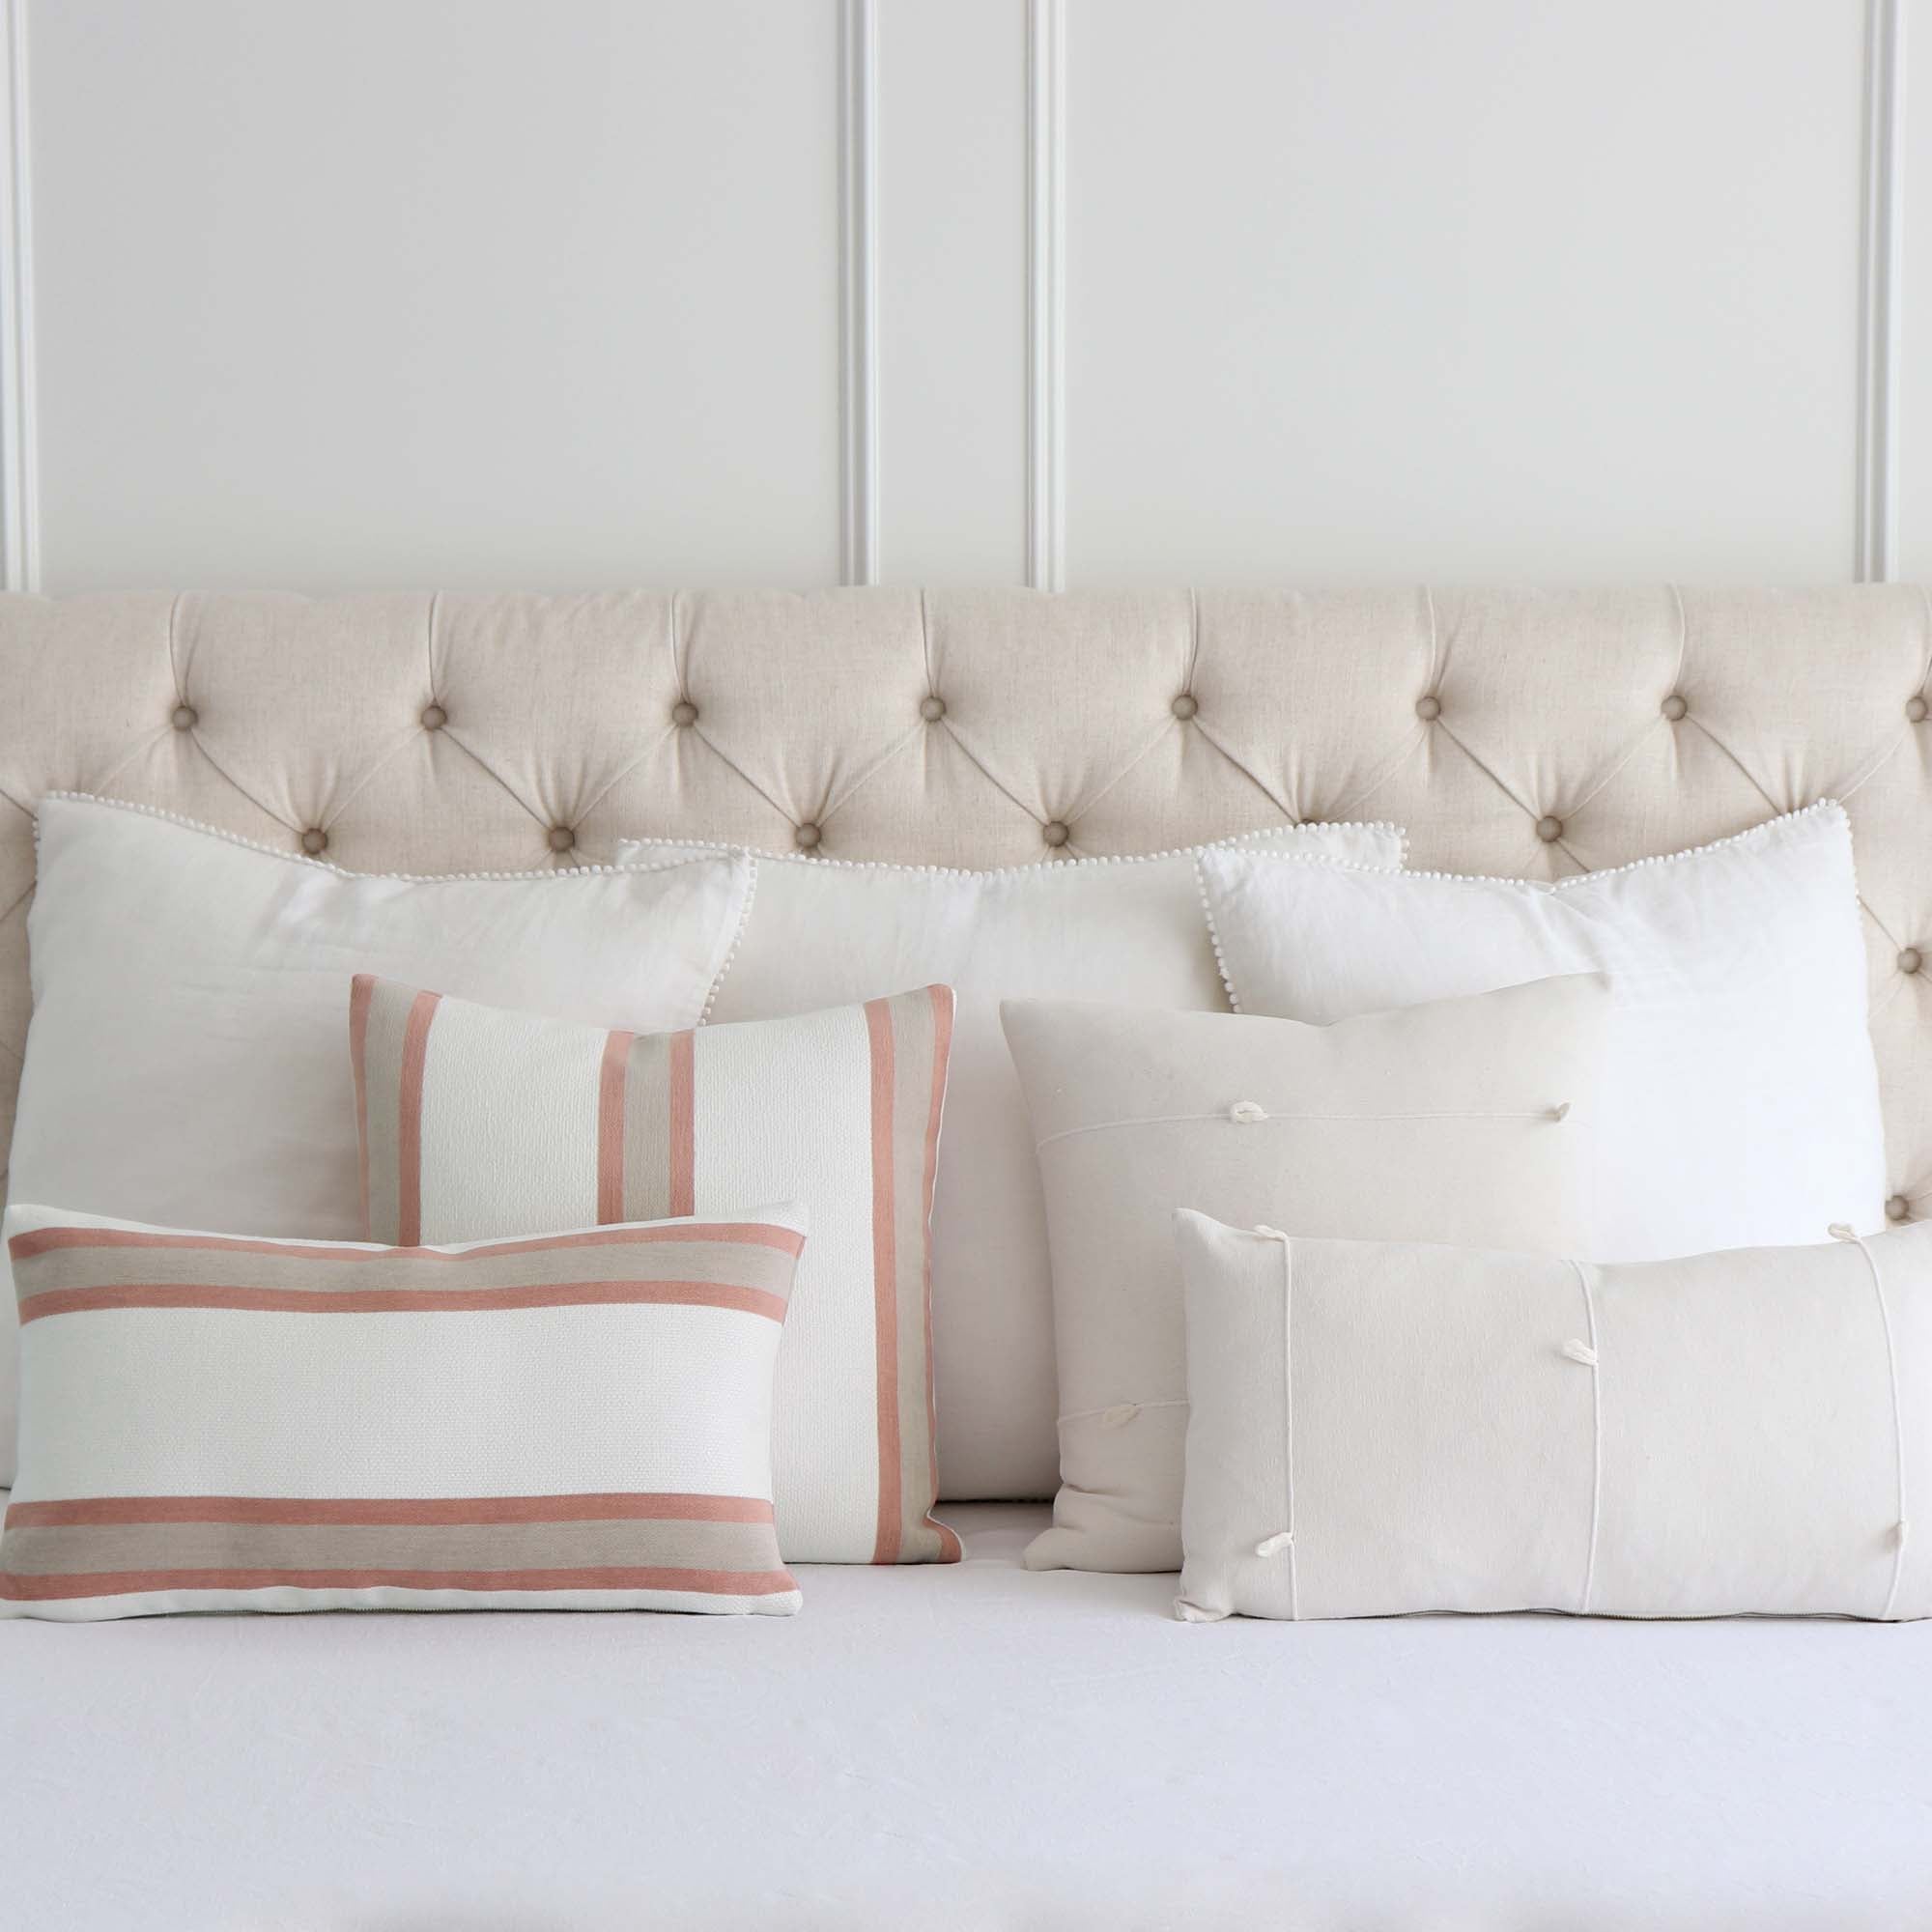 The Best Throw Pillow Inserts That Never Need to be Re-Poofed! — House Full  of Summer - Coastal Home & Lifestyle